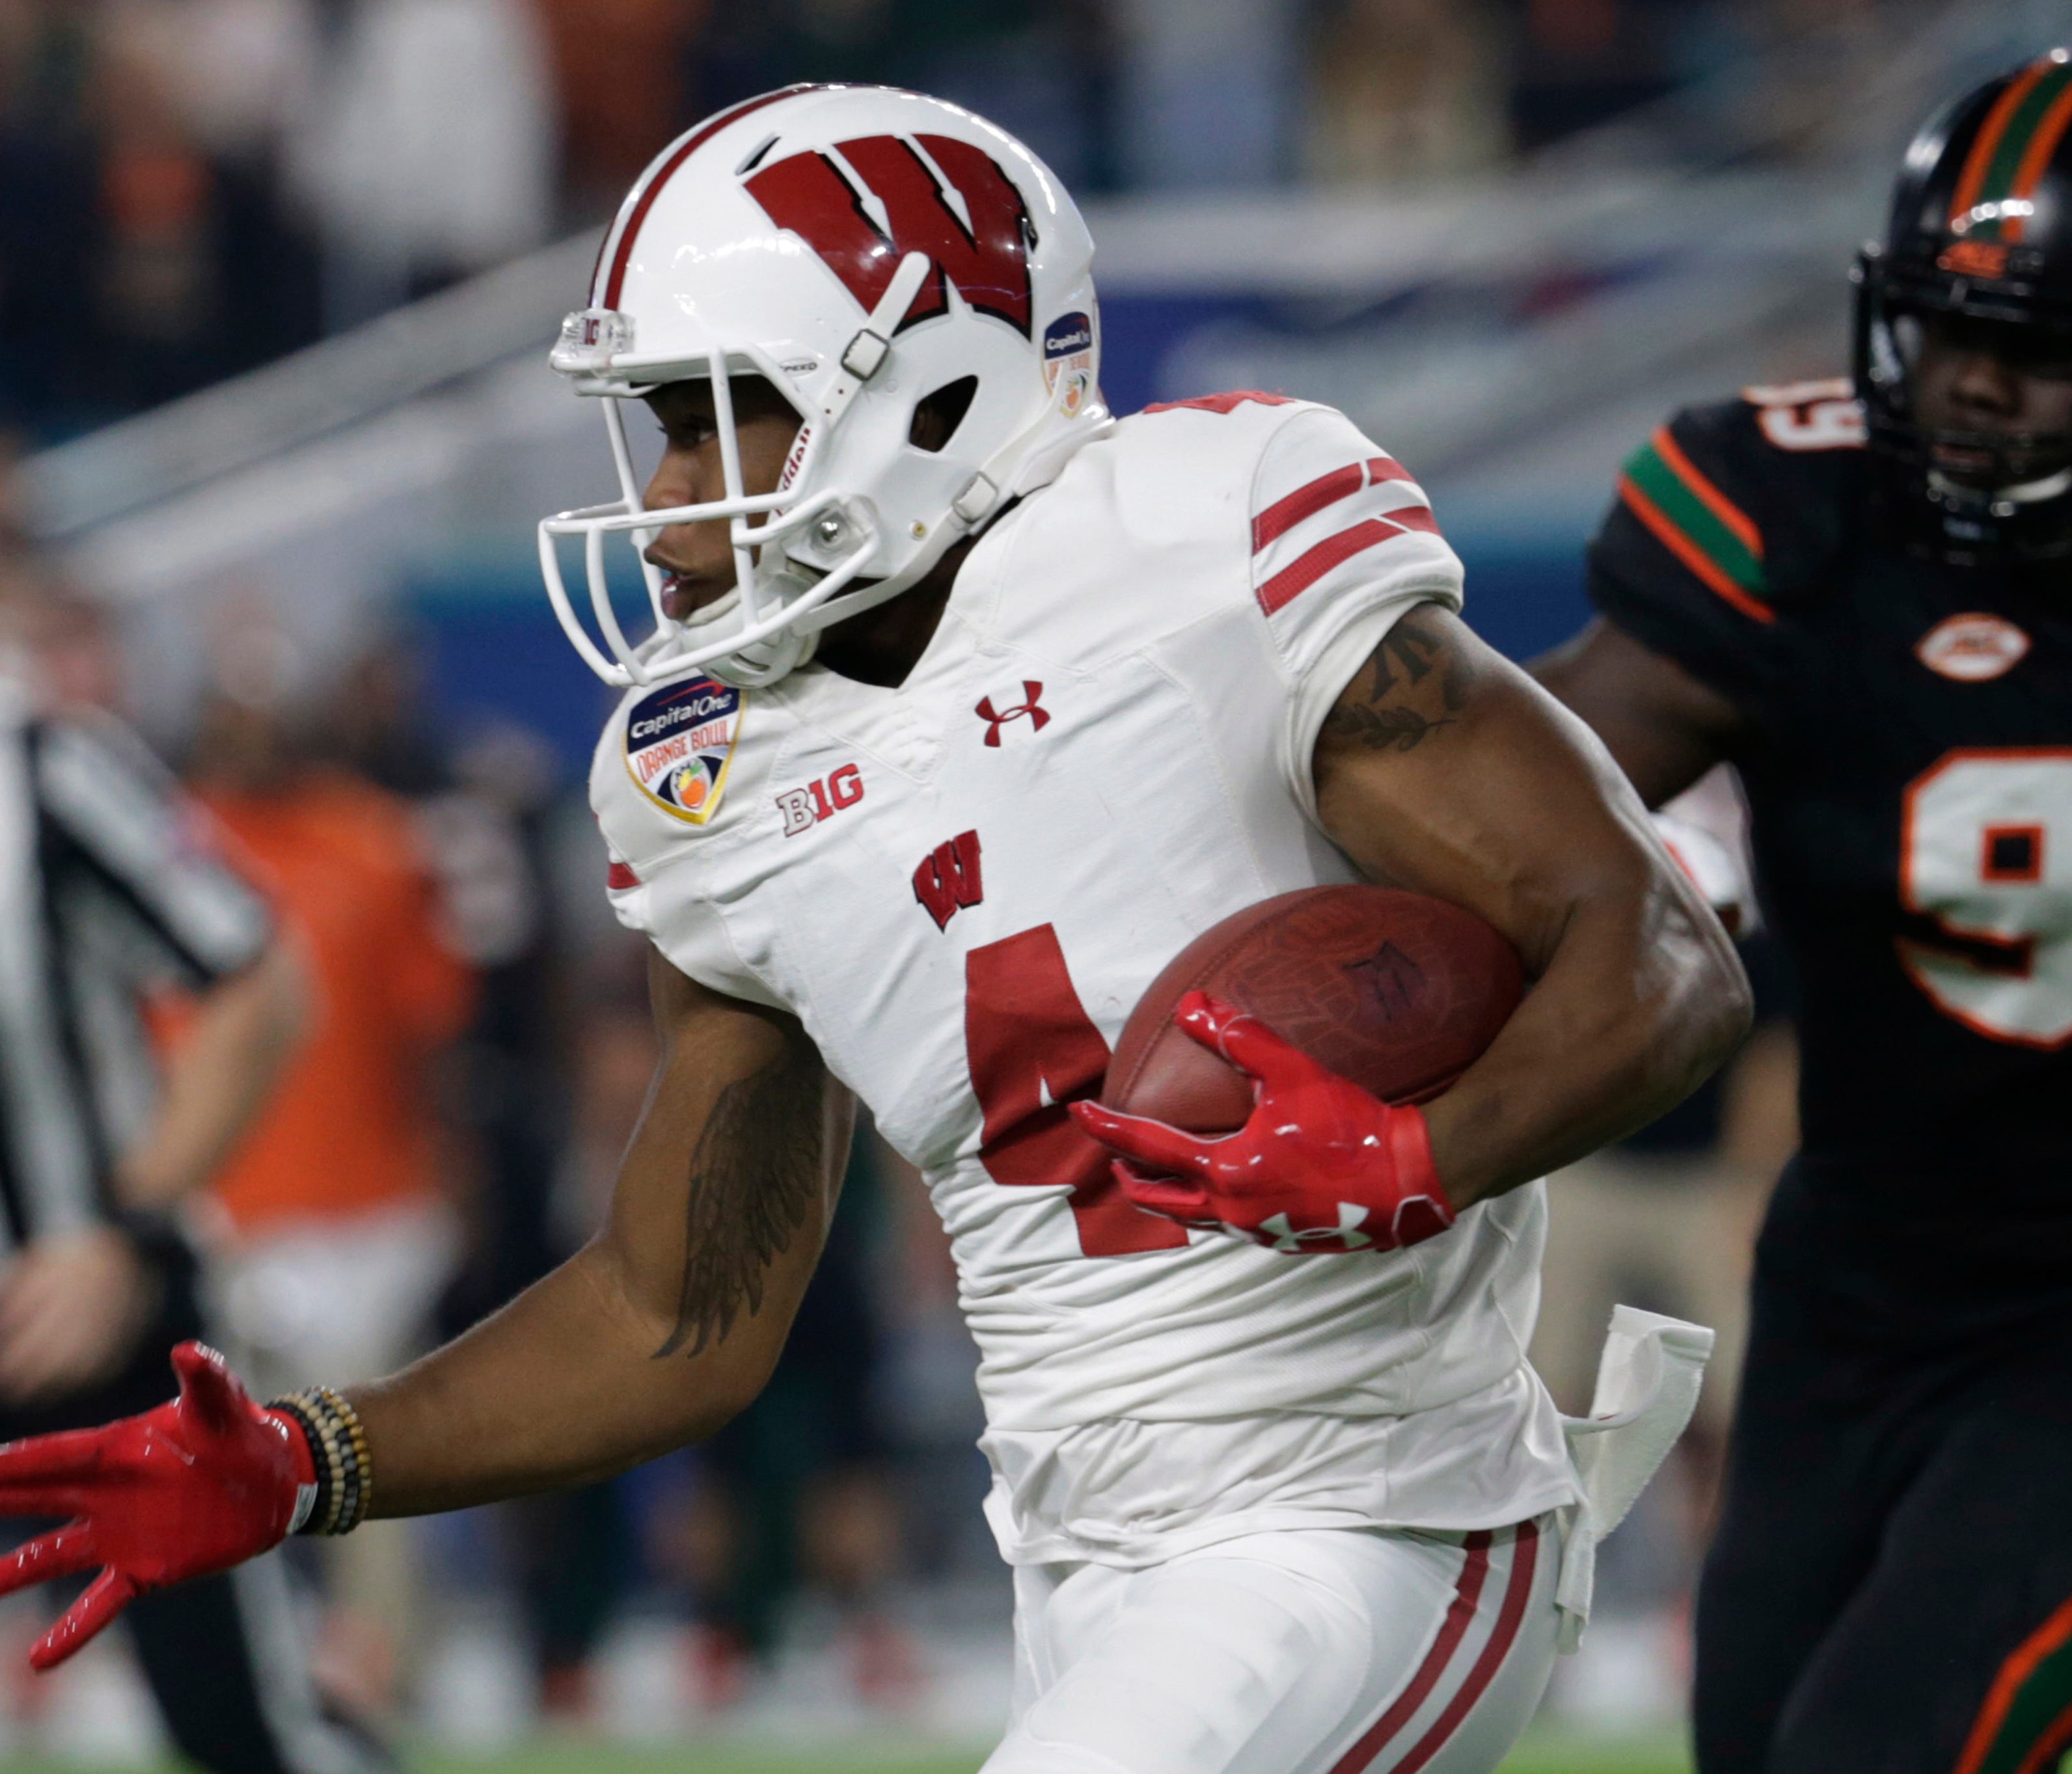 Wisconsin wide receiver A.J. Taylor (4) runs the ball, during the first half of the Orange Bowl NCAA college football game against Miami, Saturday, Dec. 30, 2017, in Miami Gardens, Fla. (AP Photo/Lynne Sladky) ORG XMIT: OTK